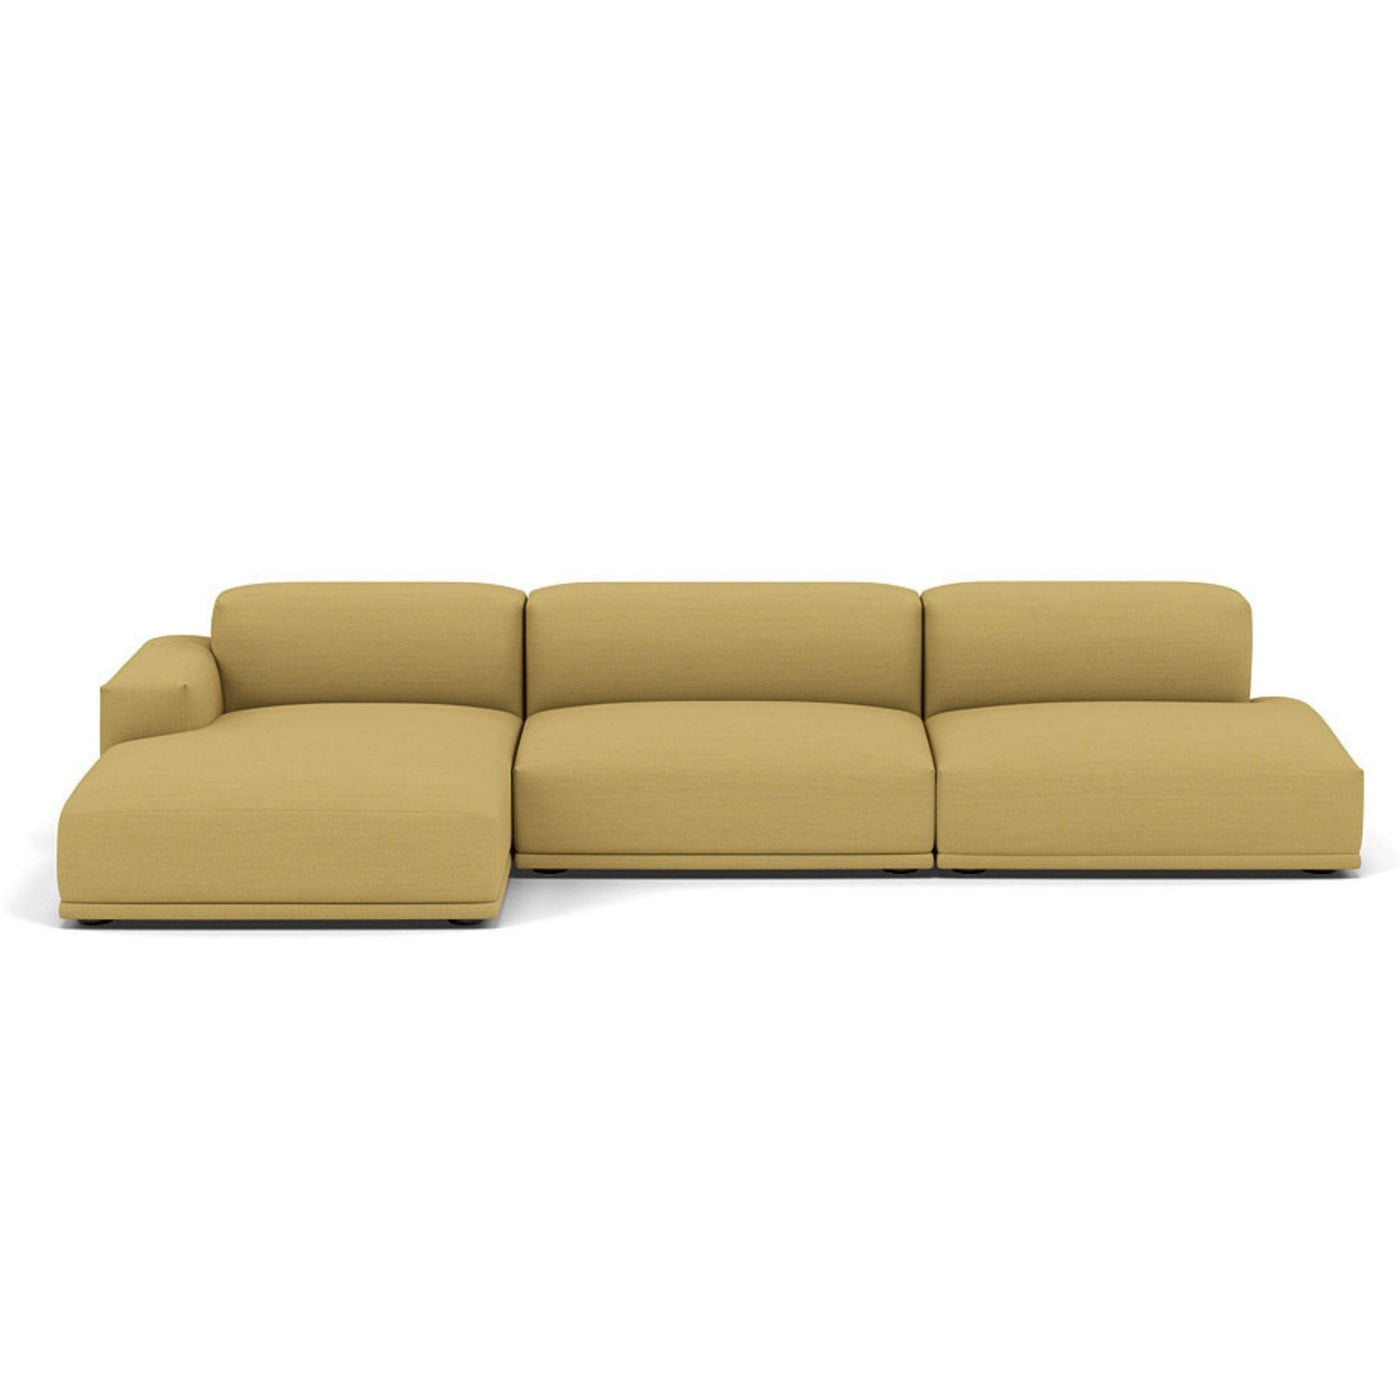 Muuto Connect modular sofa 3 seater in configuration 3. Made to order from someday designs. #colour_hallingdal-407